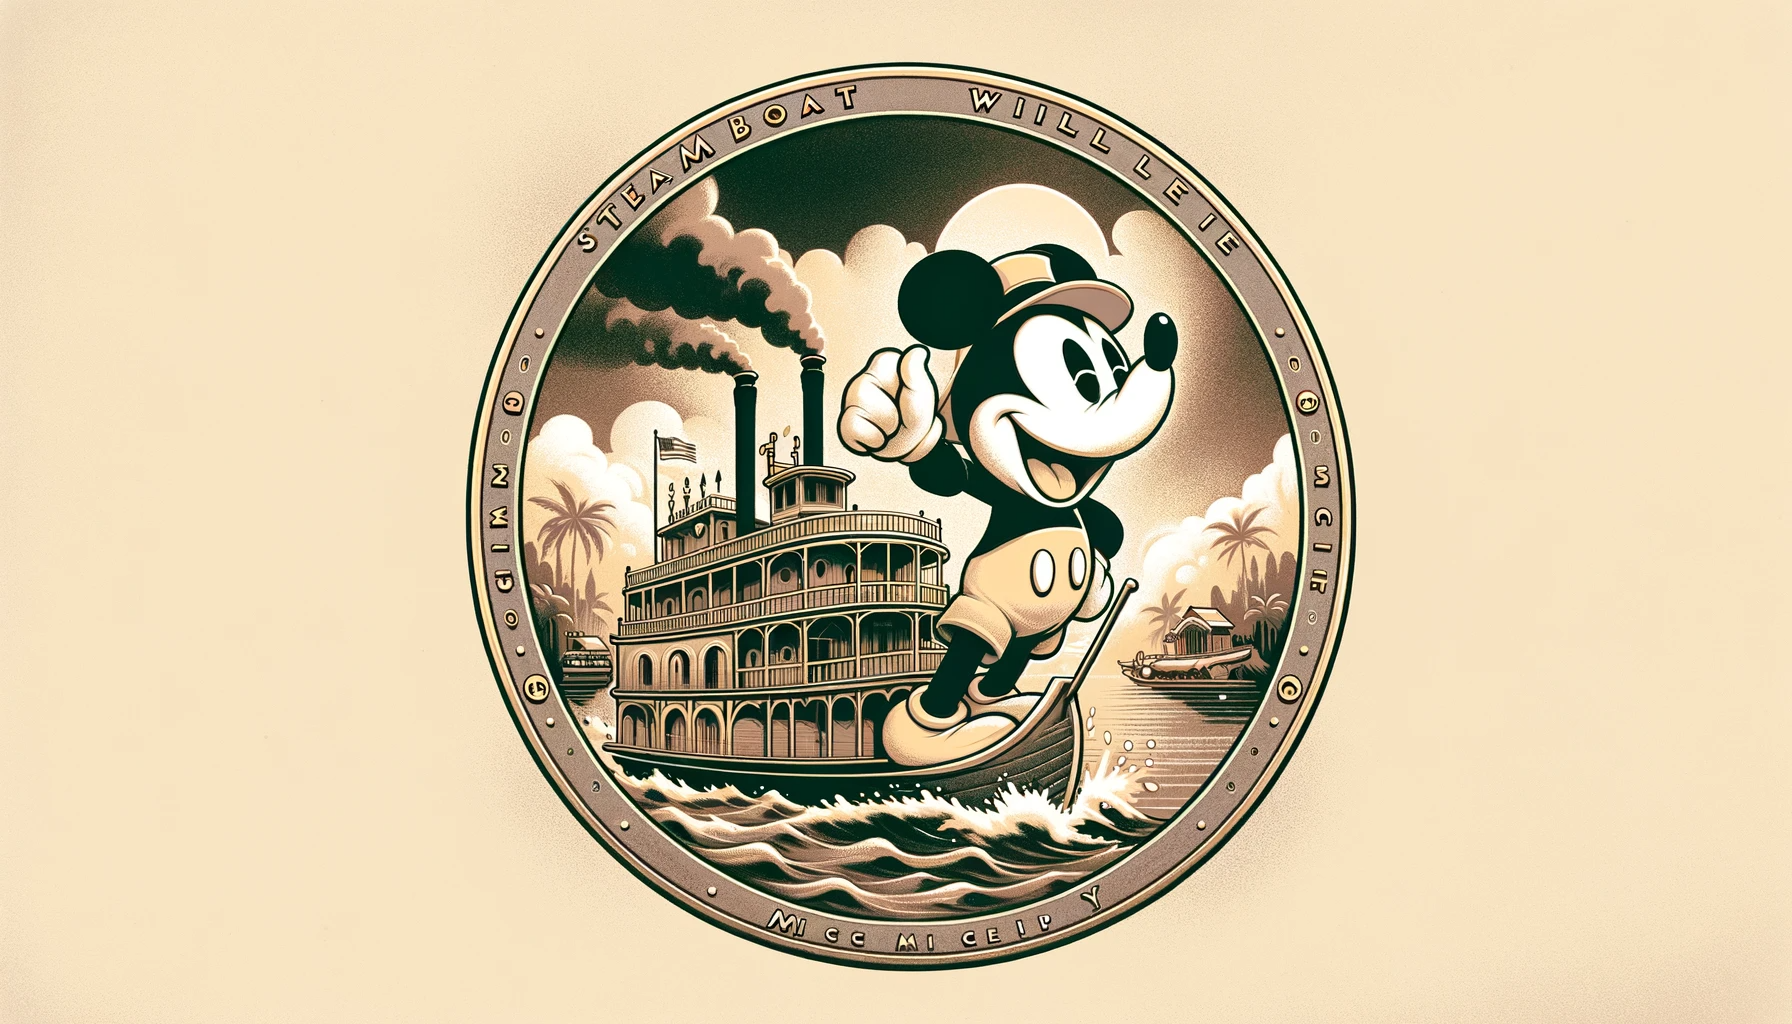 Steamboat Willie (MICKEY) crypto